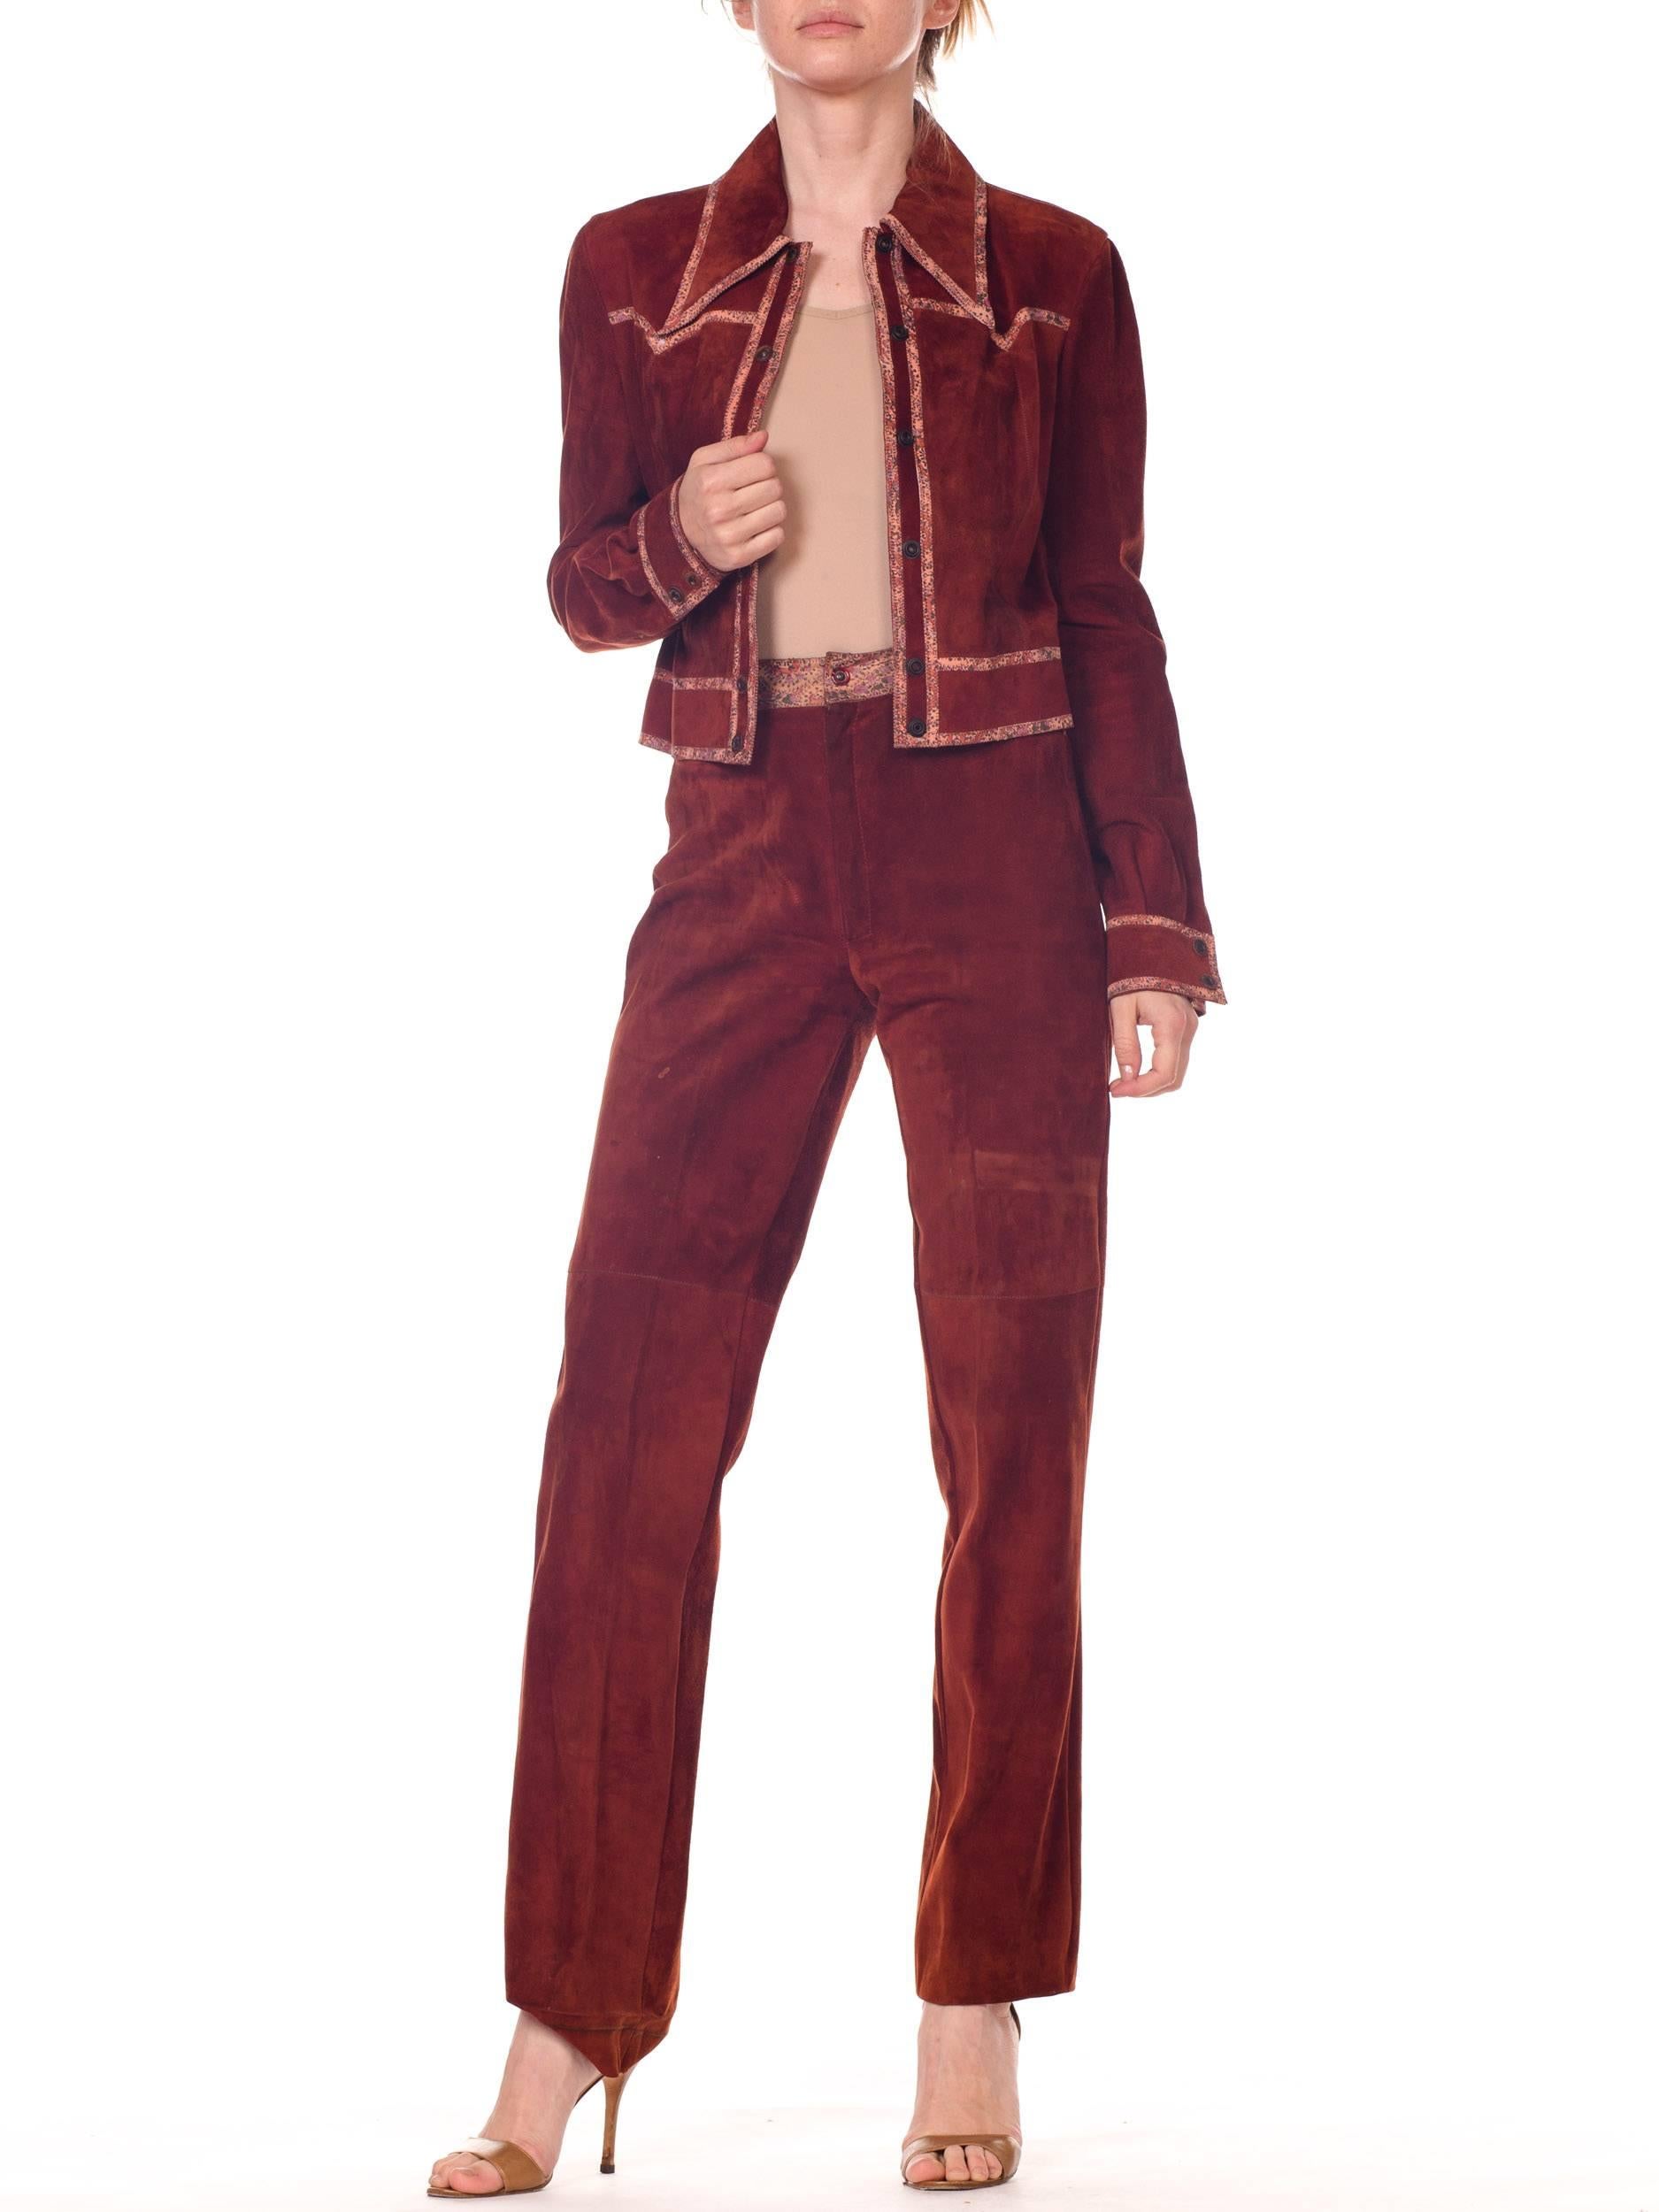 Roberto Cavalli Cognac Suede Pants and Jacket set with printed trims 1